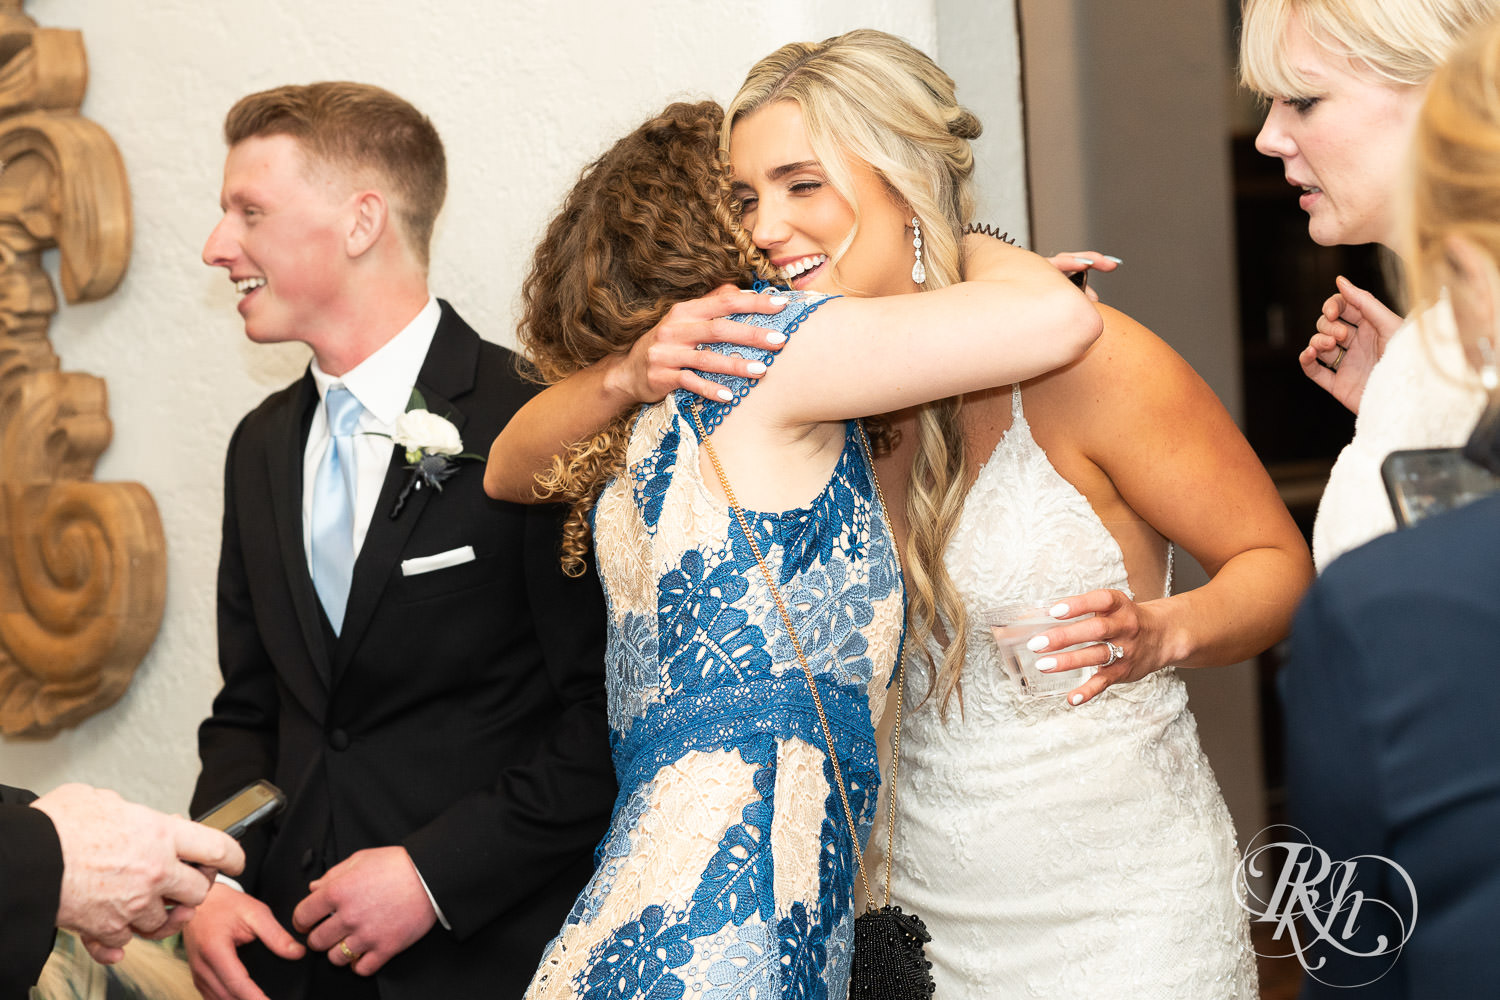 Bride and groom hug guests after wedding ceremony at Bavaria Downs in Chaska, Minnesota.